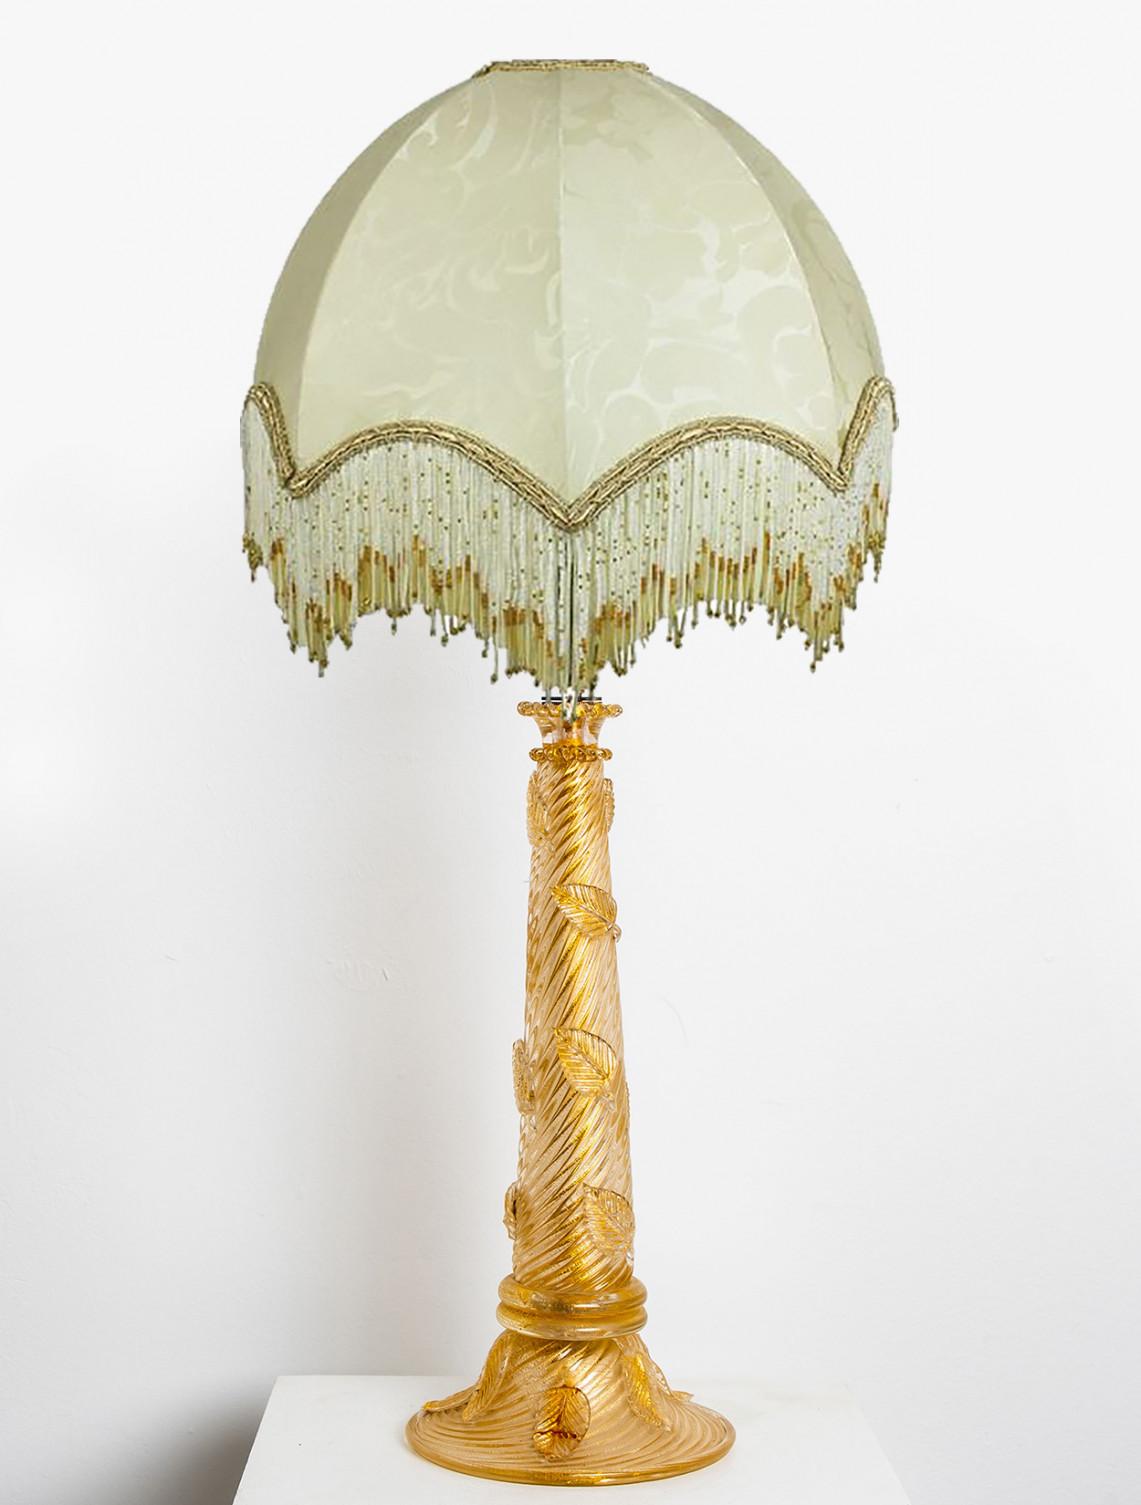 Hand Blown Table Lamp by Barovier & Toso Gold Murano Glass, Italy, 1950s For Sale 1